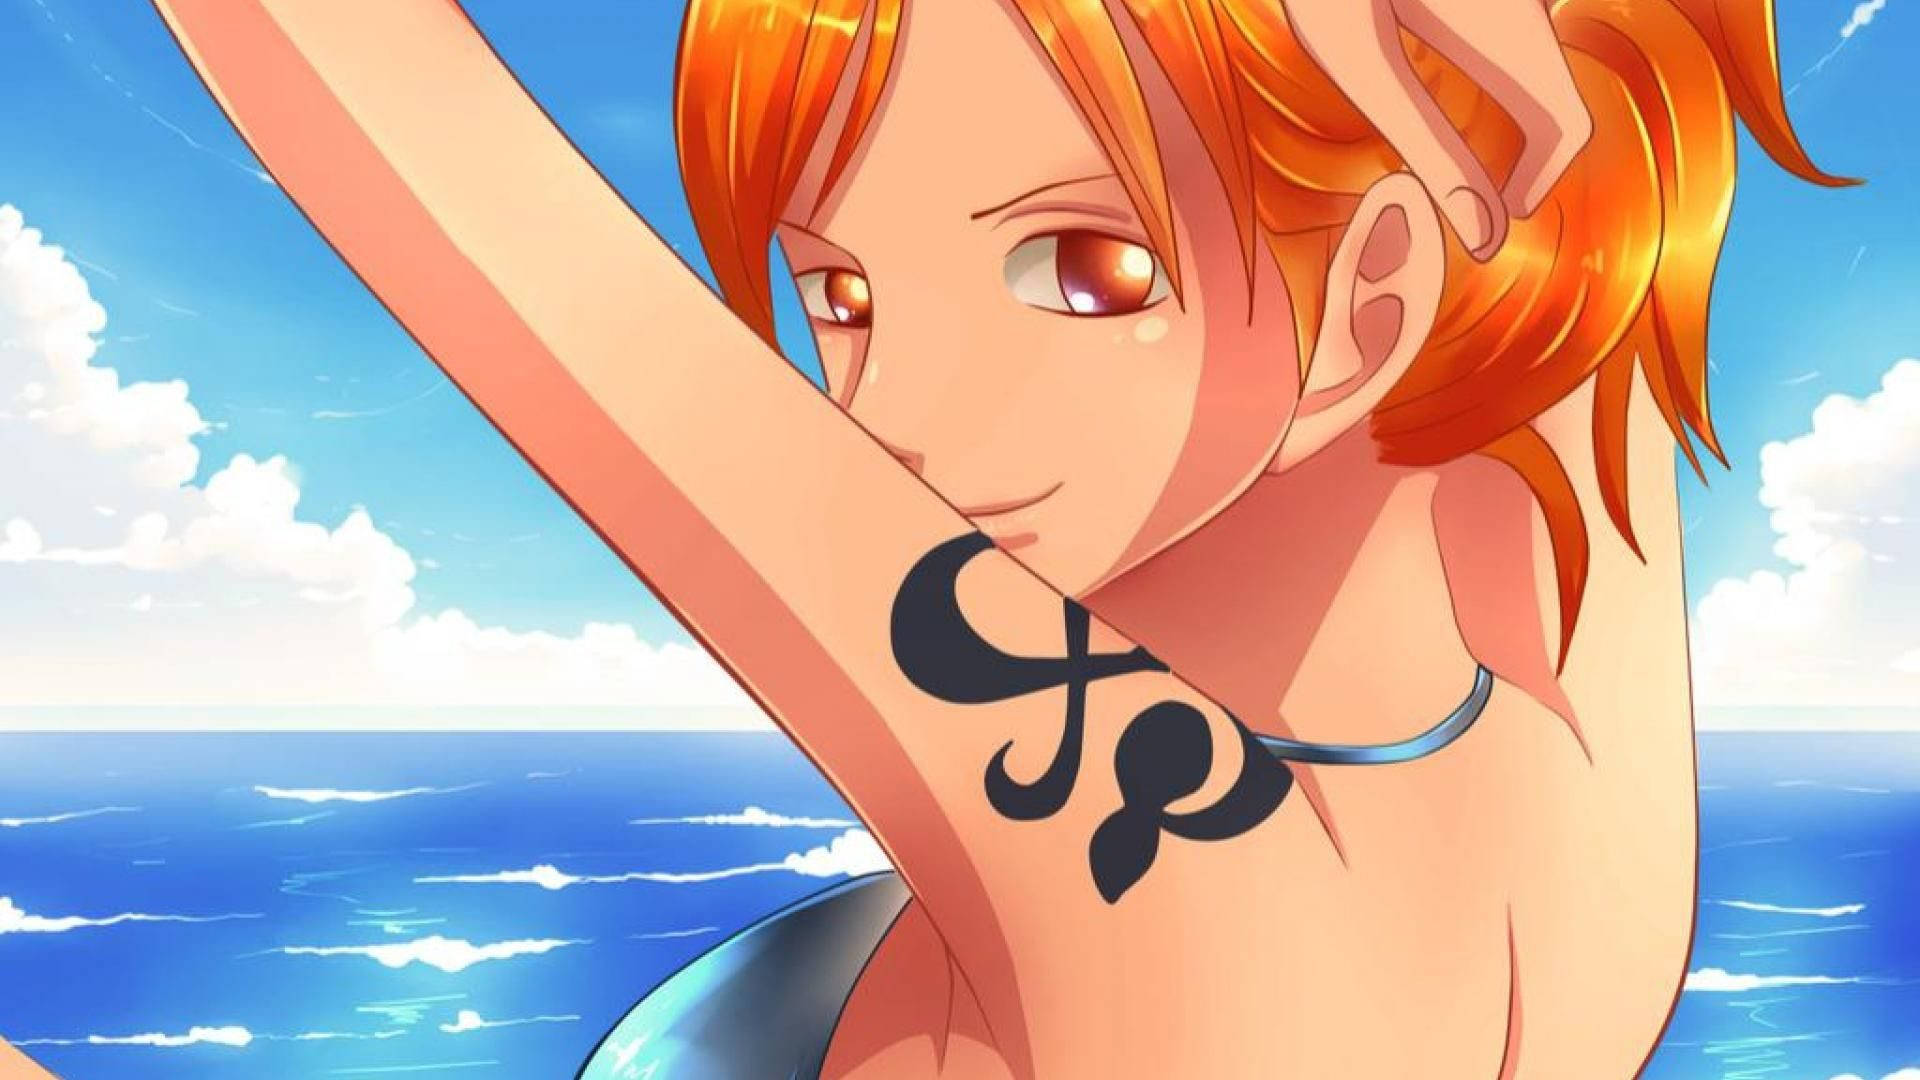 WT!] Nami - A Fishy Surprise For You With a 2.6 On MAL [NSFW++] : r/anime